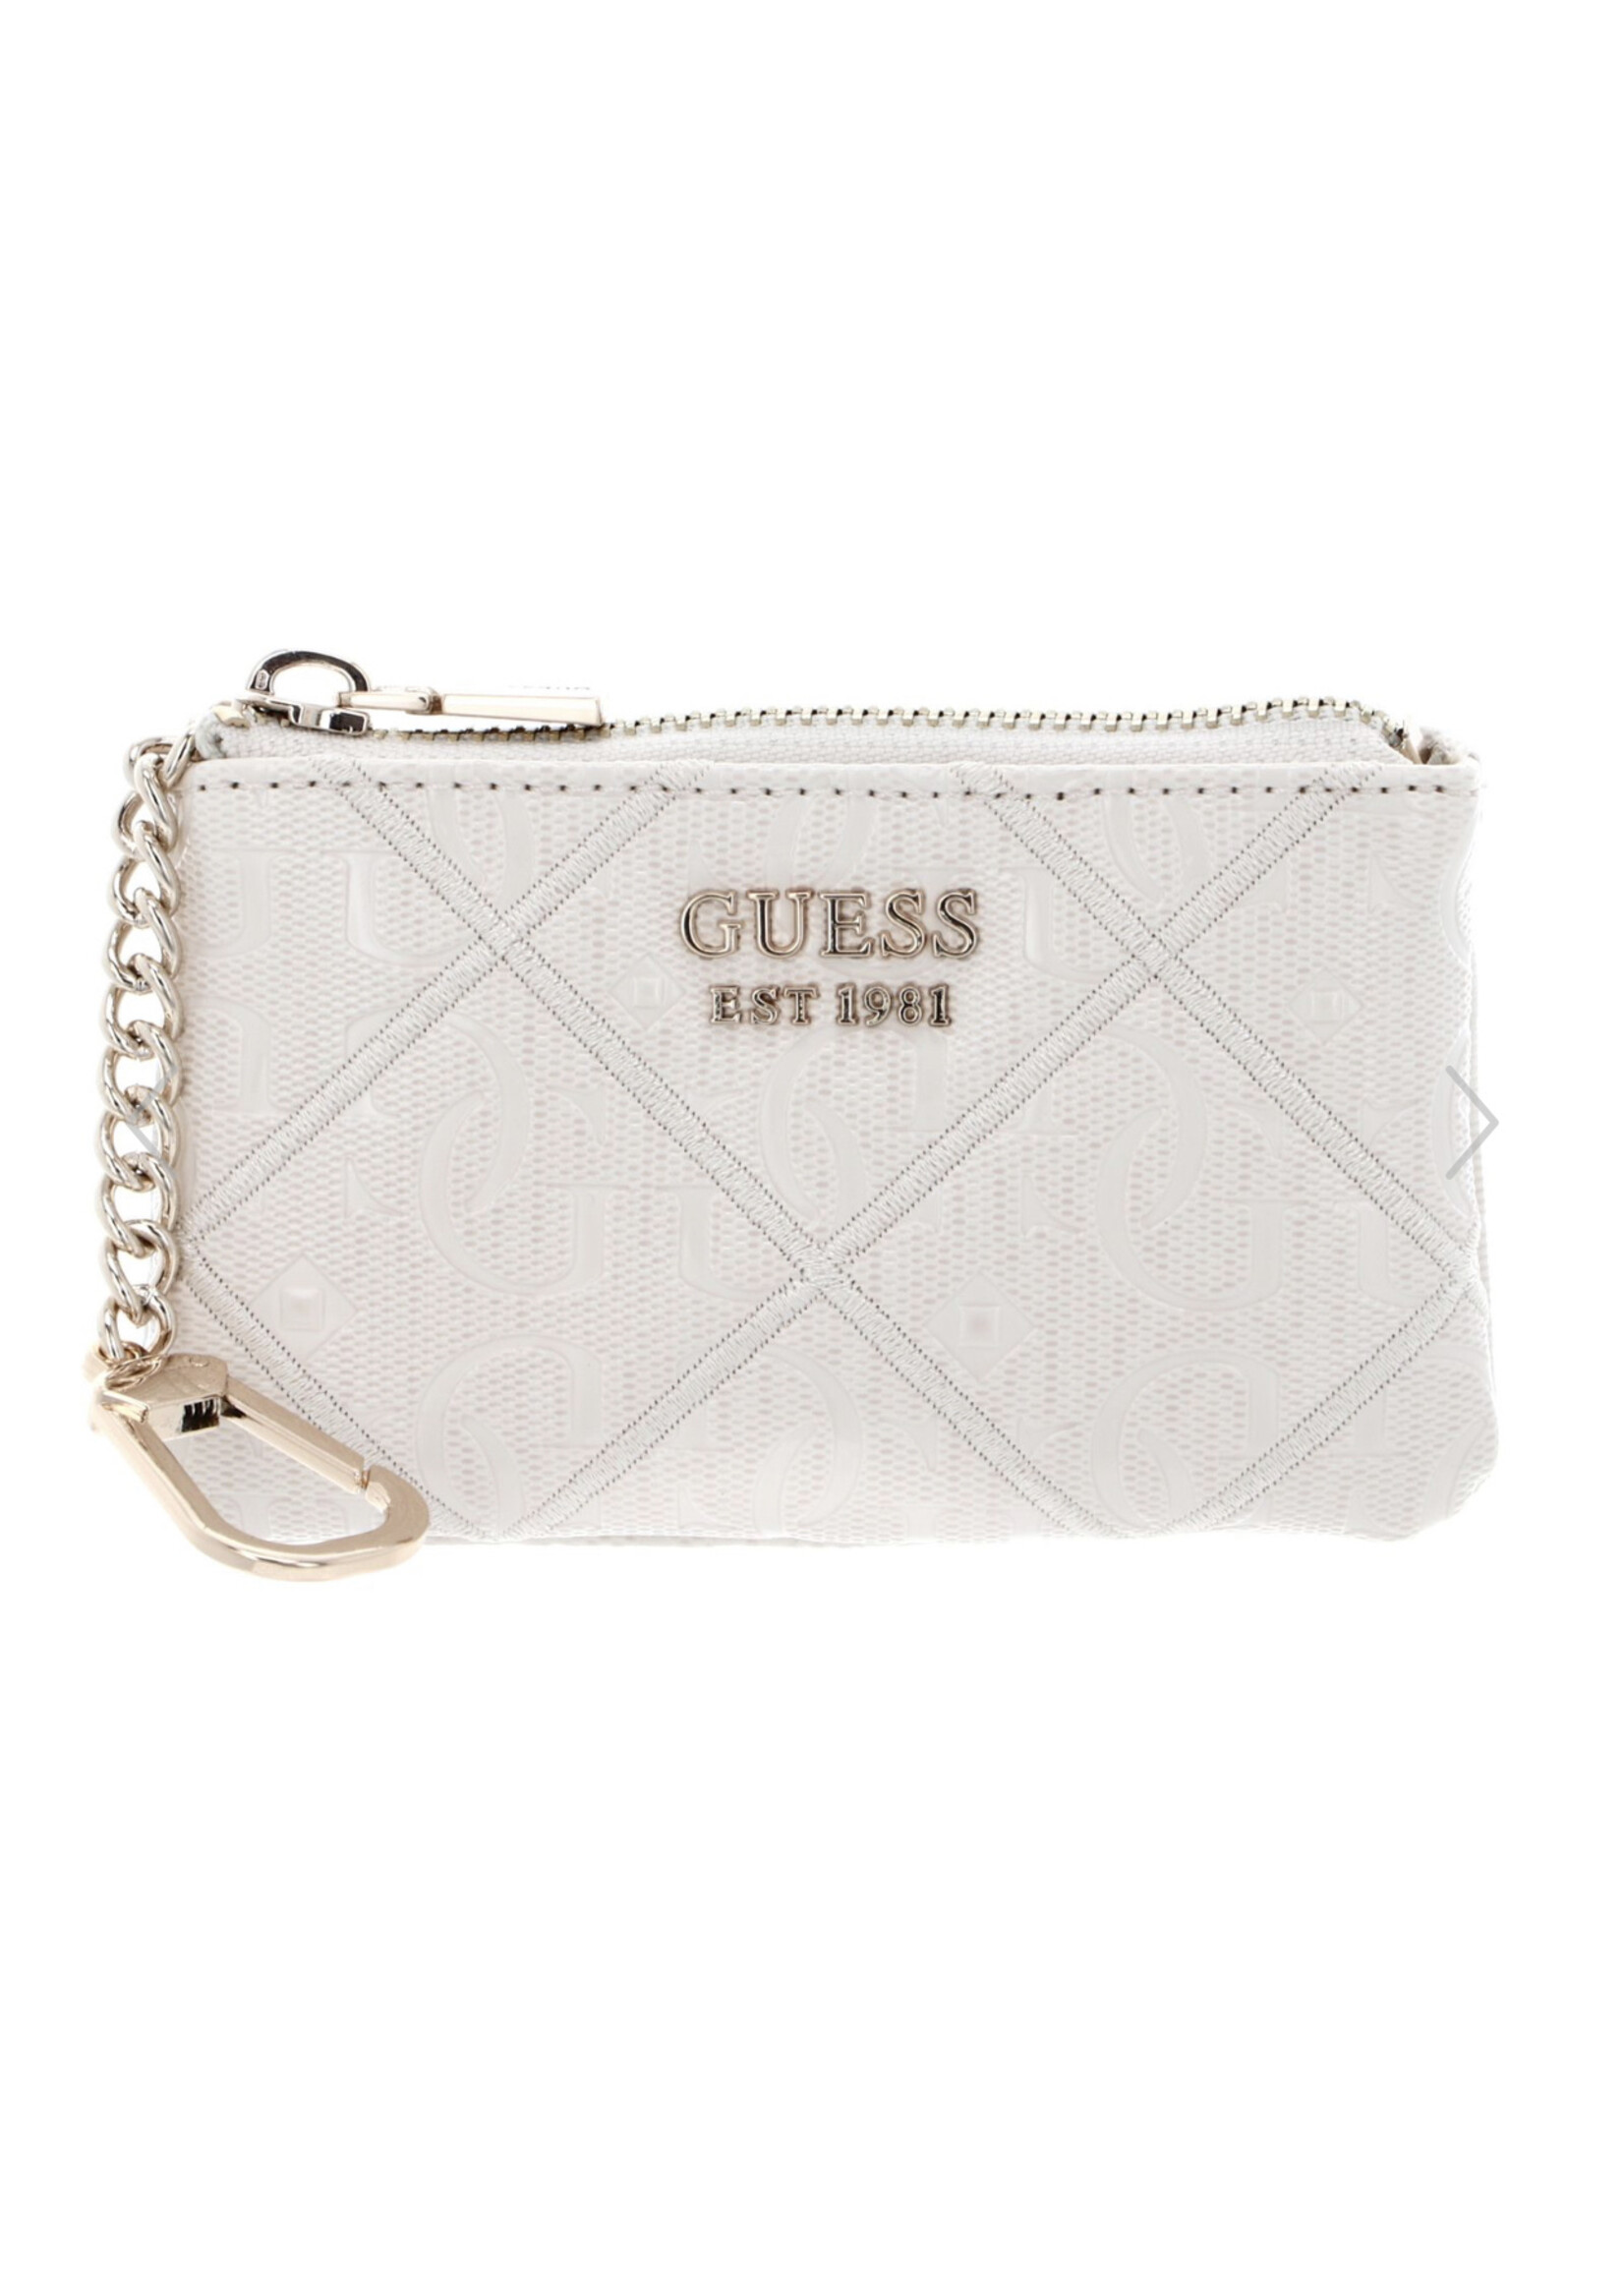 GUESS LADY CADDIE POUCH STONE SWGG8783340